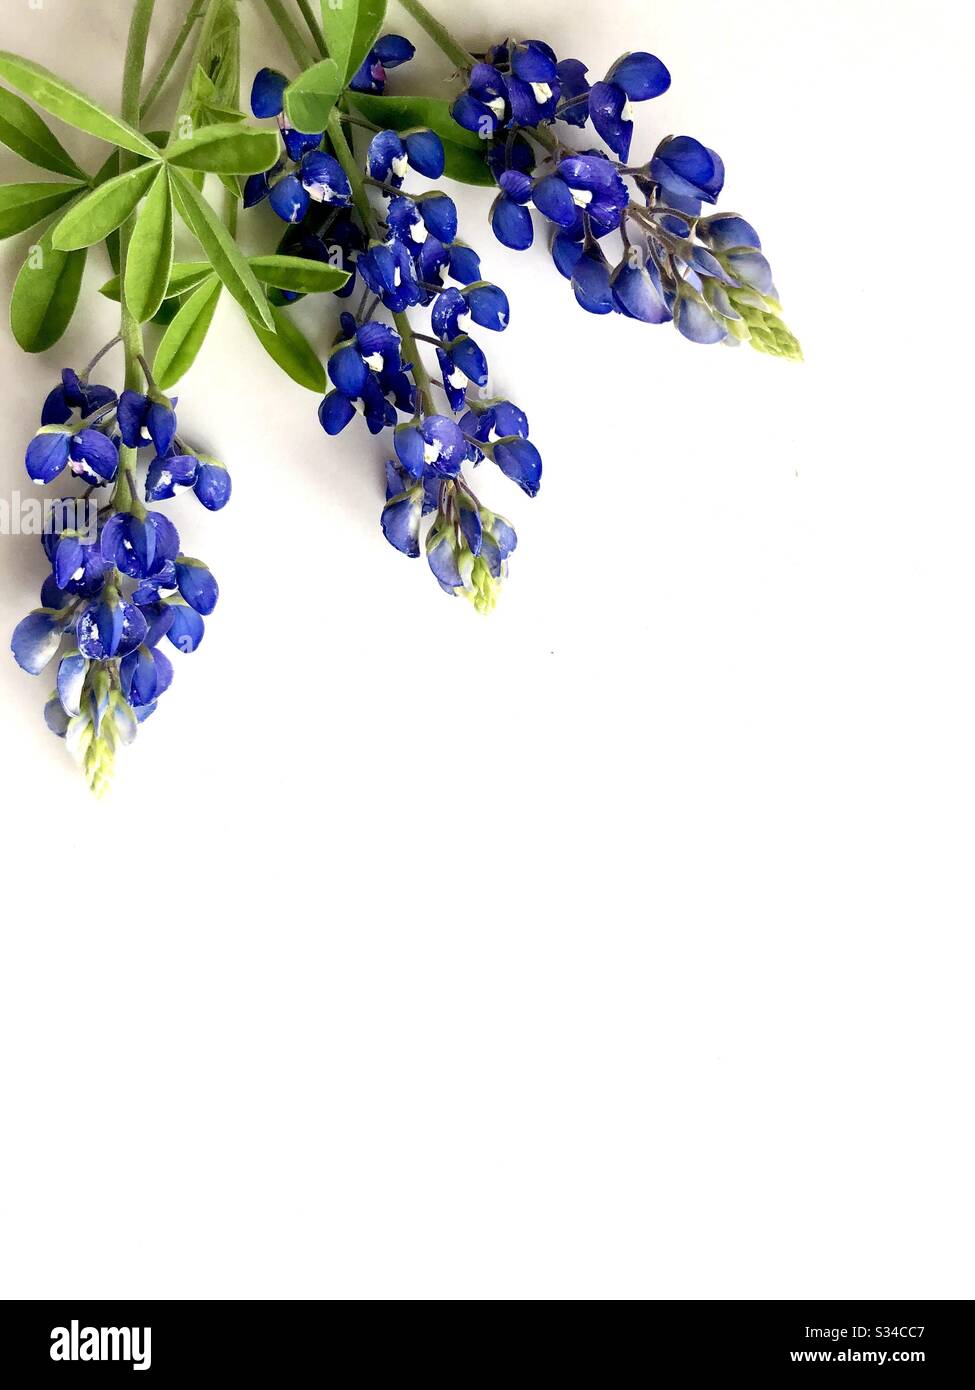 Bluebonnets on a white background with copy space Stock Photo